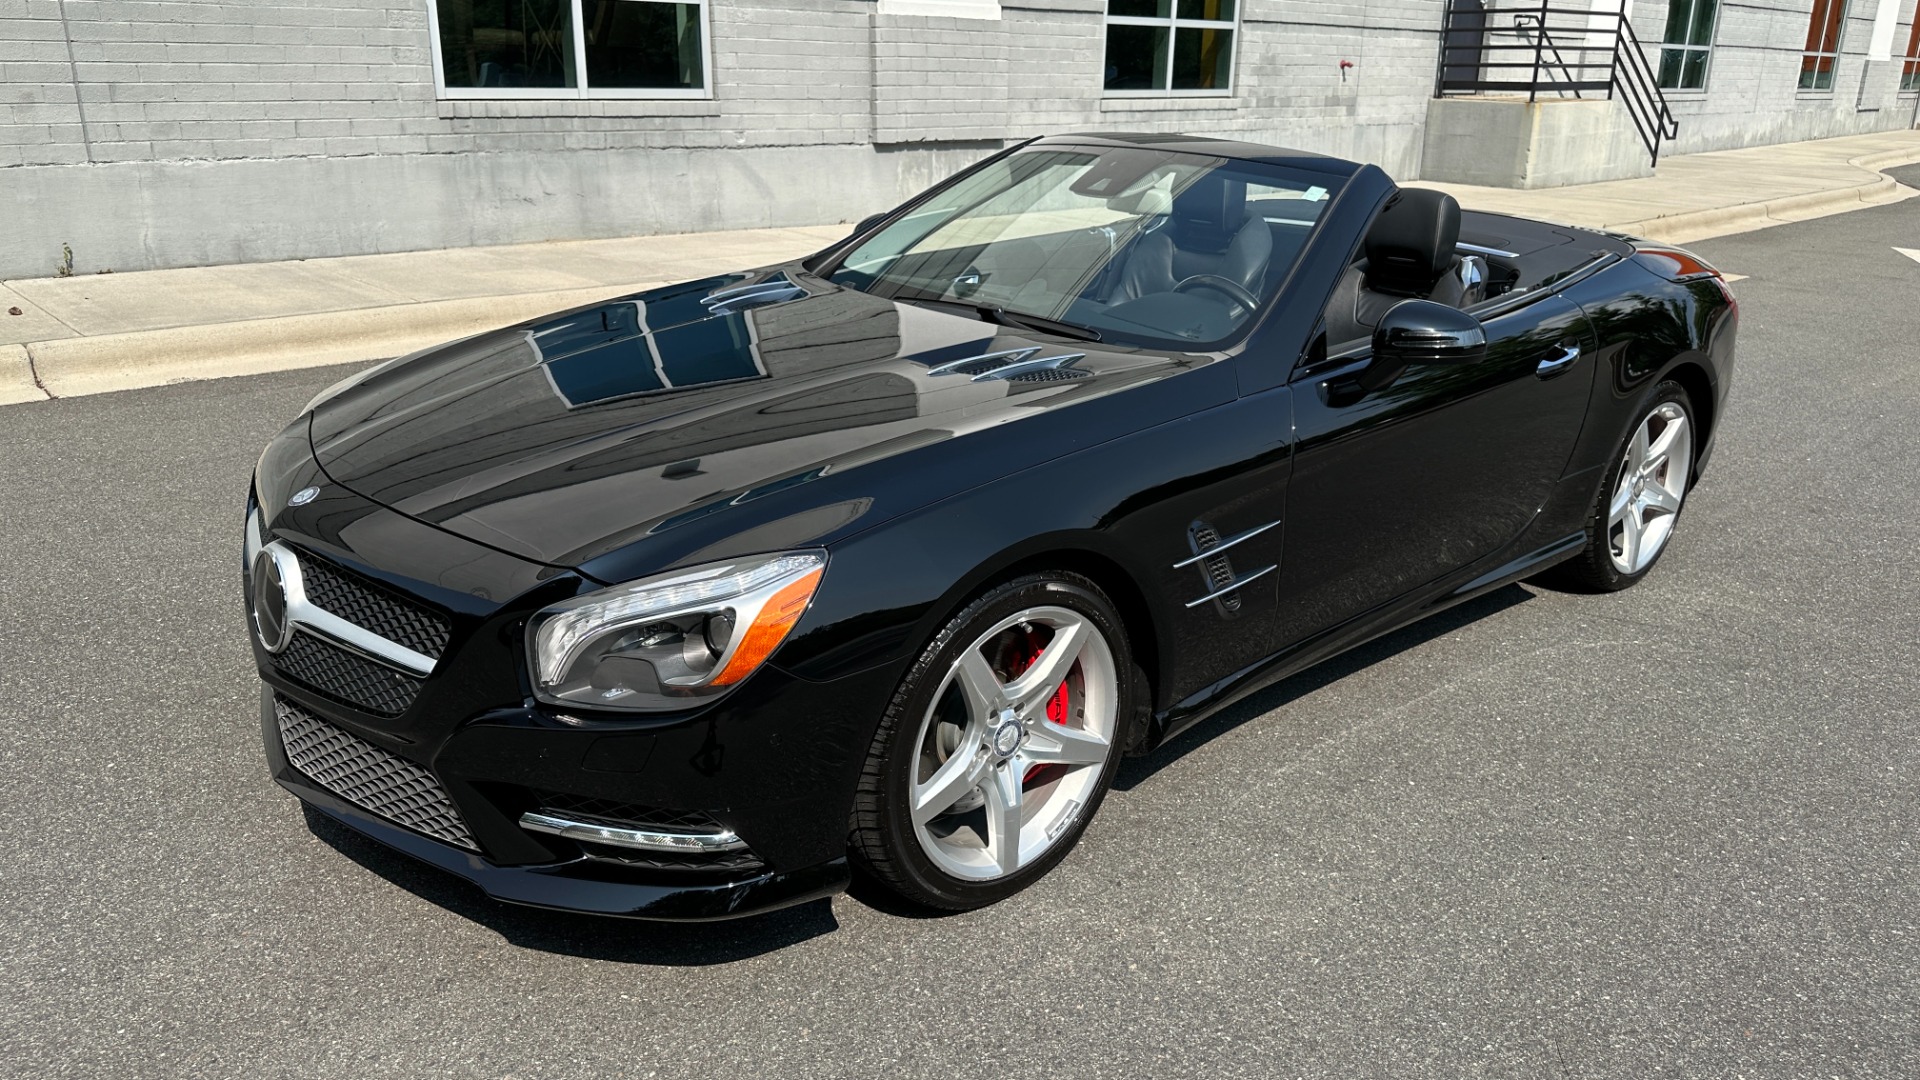 Used 2013 Mercedes-Benz SL-Class SL 550 / CONVERTIBLE / GLASS HARD TOP / NAV / V8 TURBO / RED BRAKES for sale $35,800 at Formula Imports in Charlotte NC 28227 2